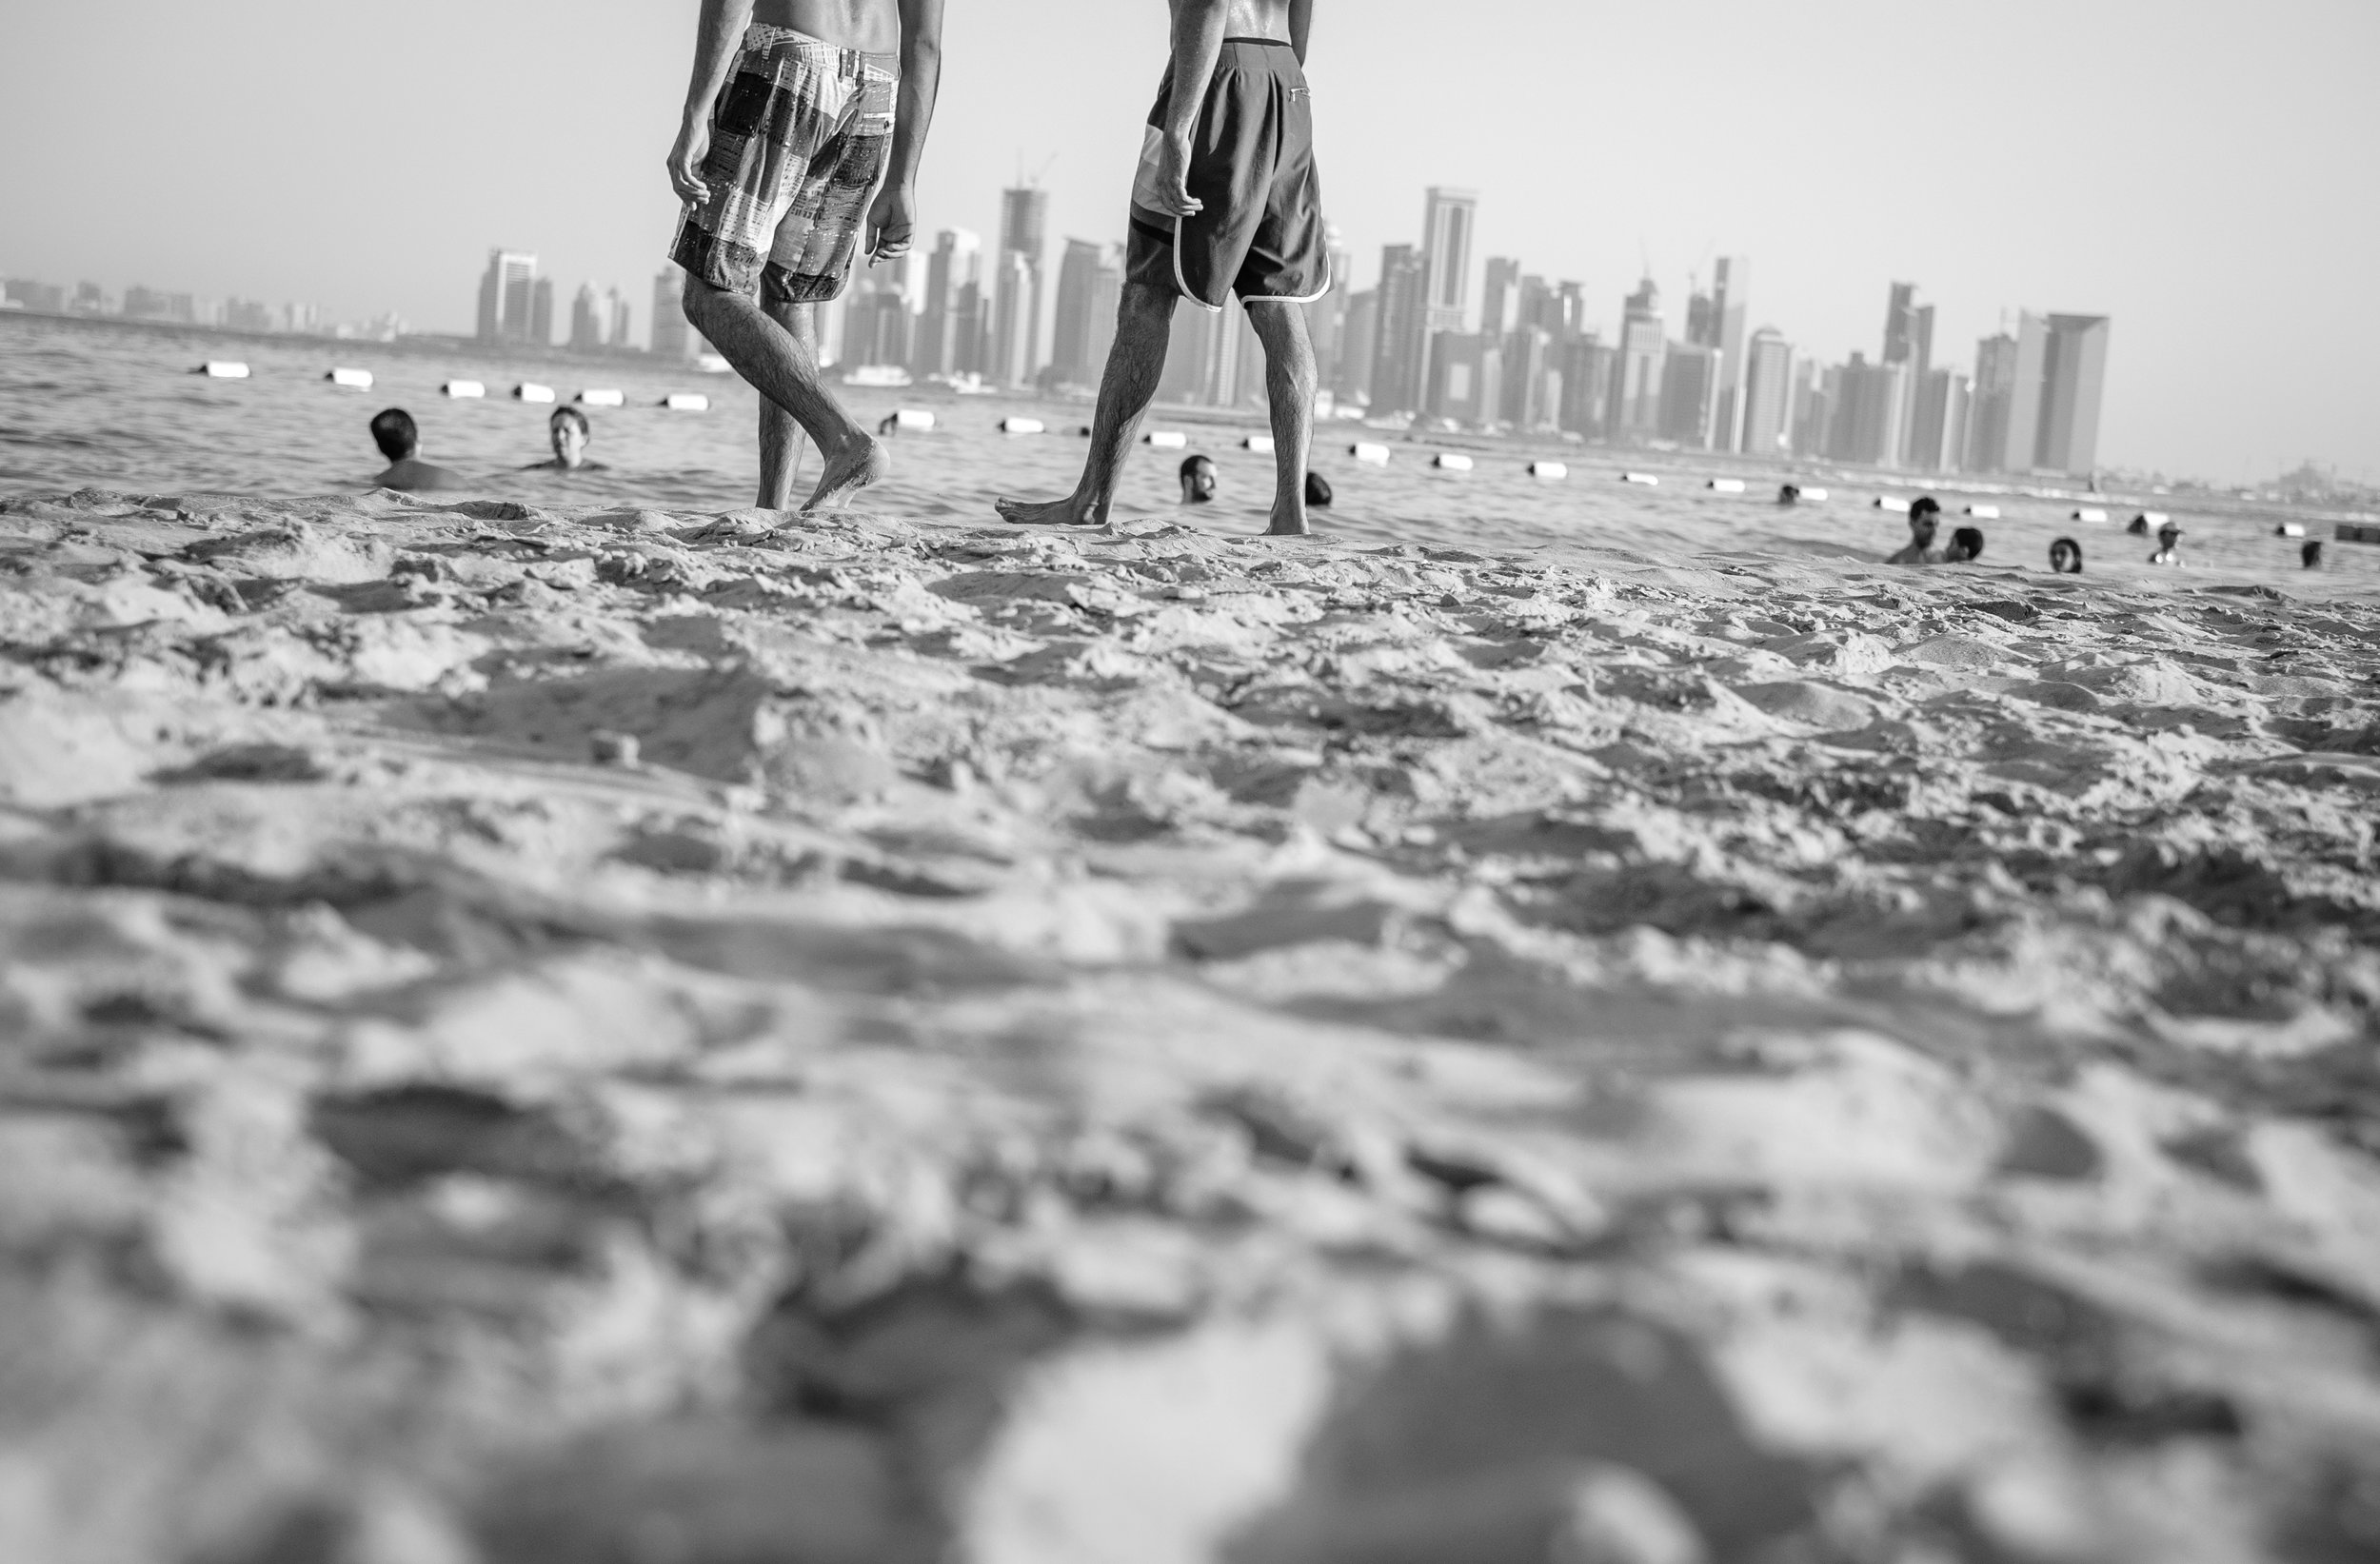  Expats enjoying the sun and sand at Nikki Beach on The Pearl in Doha. The Pearl is an artificial island comprising of luxury residential estates and businesses. It is the first land in Qatar made available for ownership by foreign nationals. The Wes